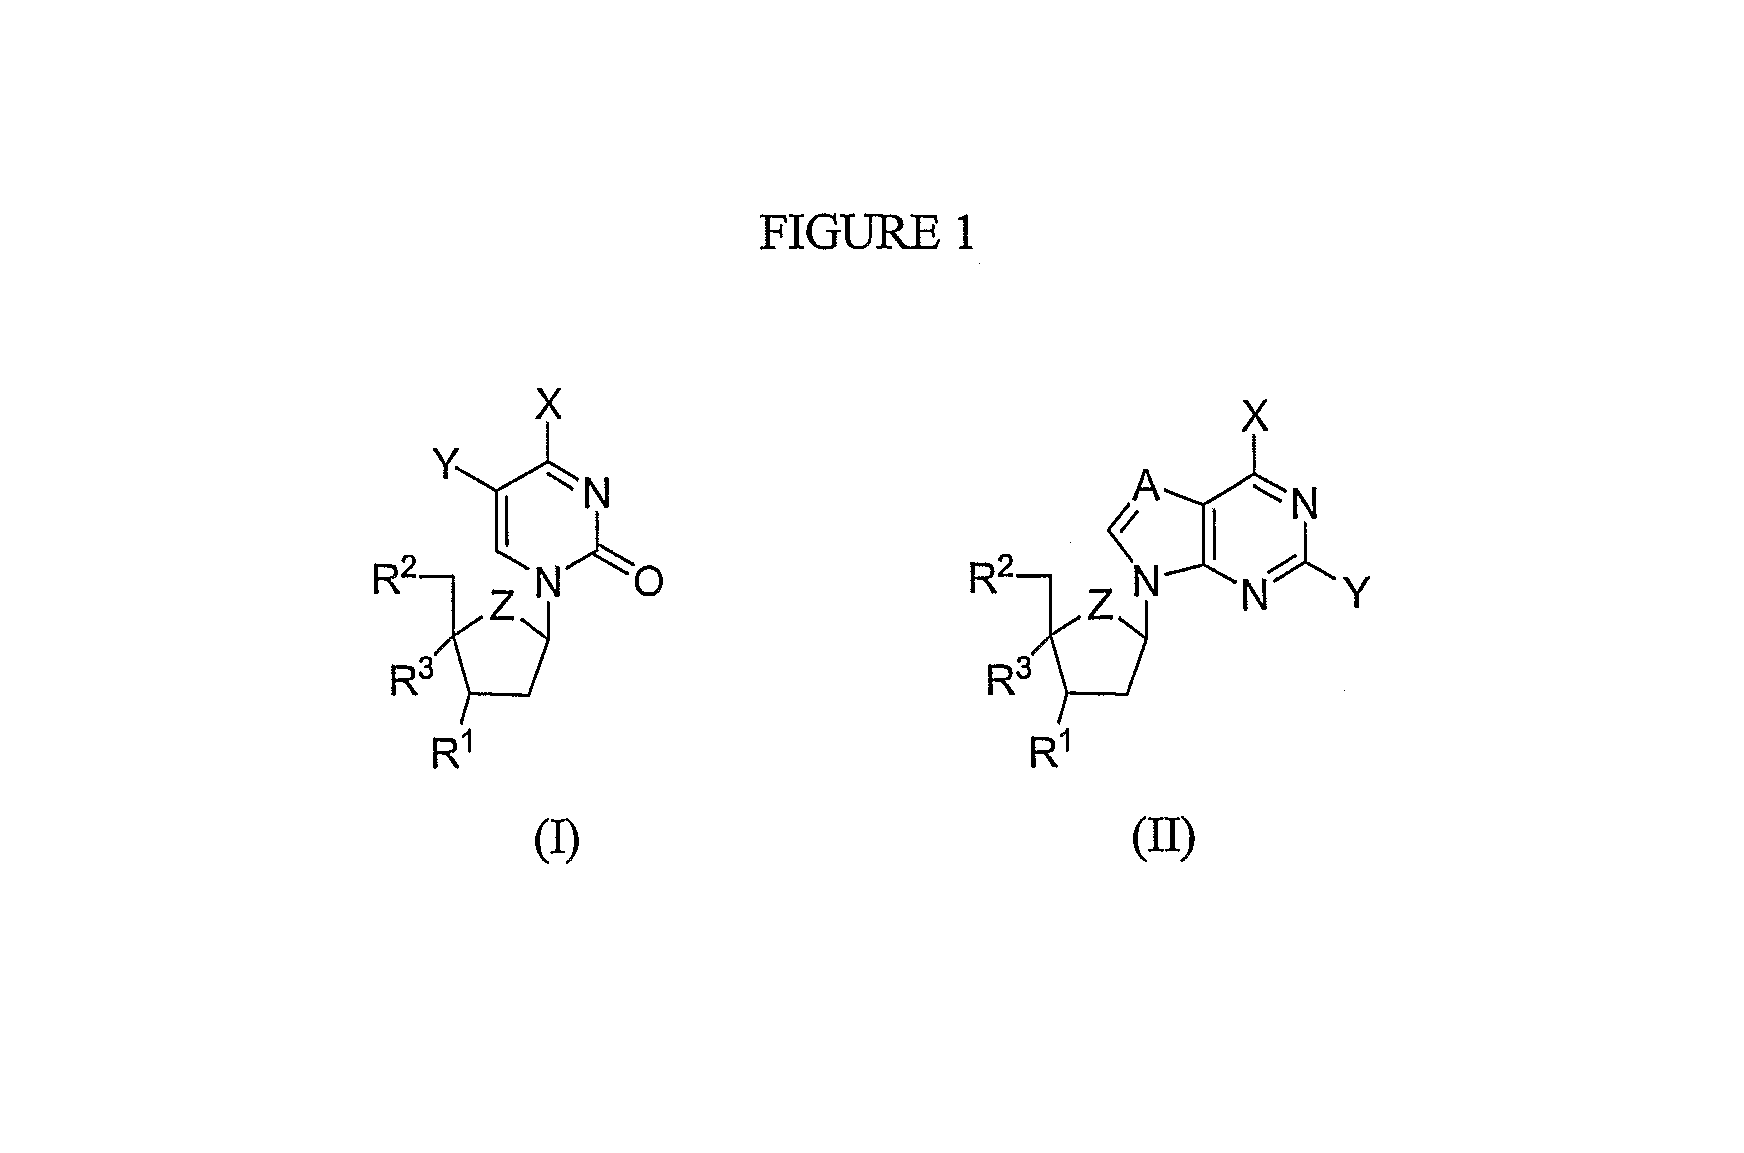 Modified 4'-nucleosides as antiviral agents